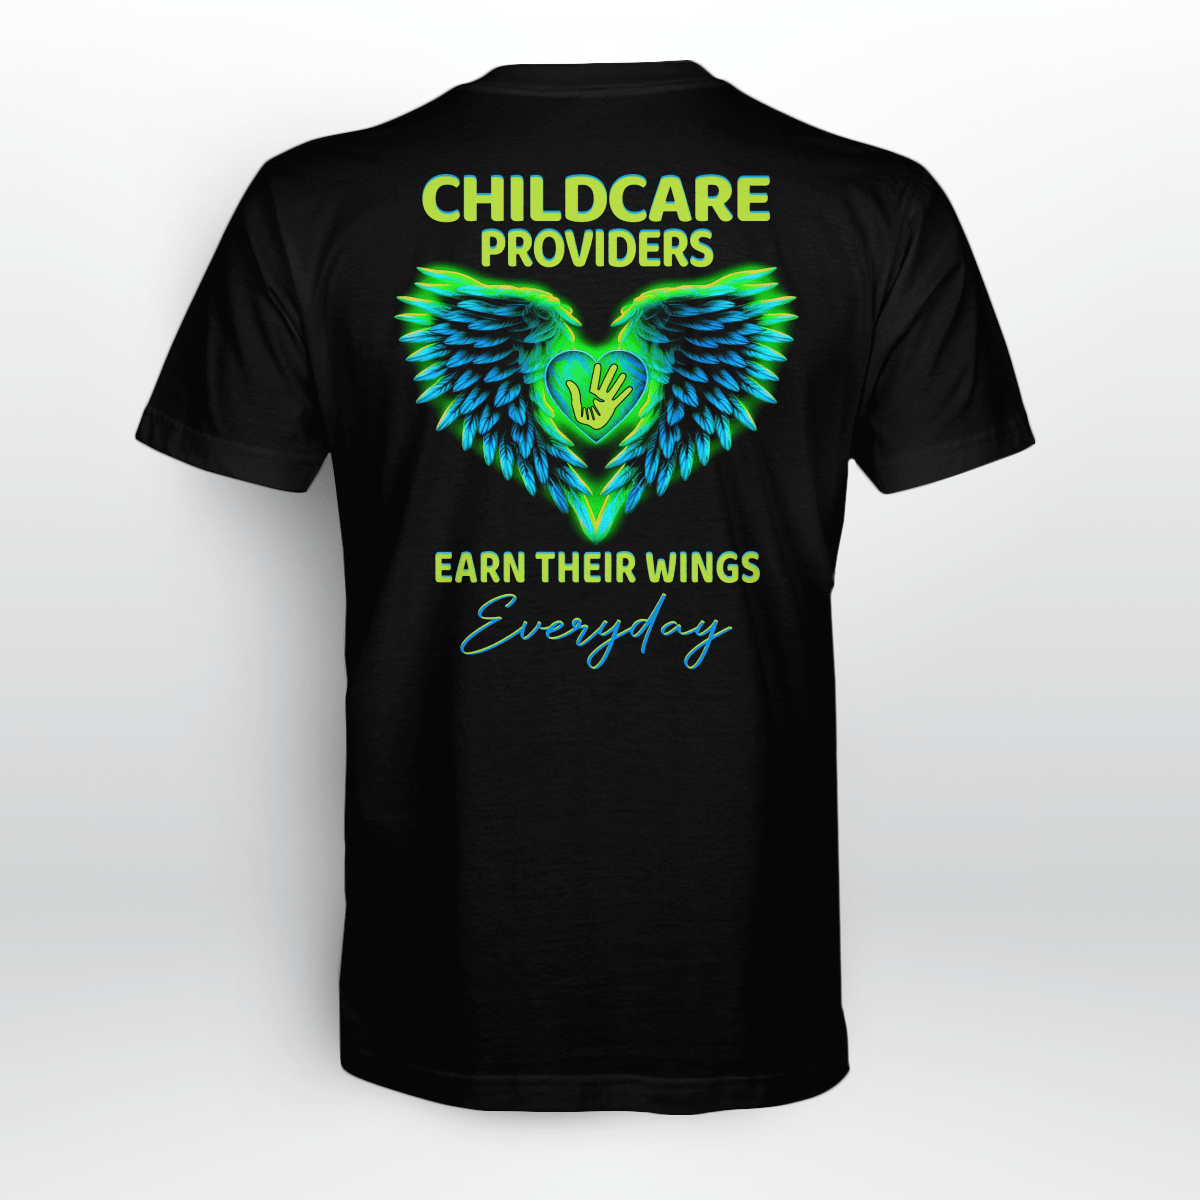 Childcare Provider Earn Their Wings Everyday-T-Shirt -#F260523EARTH14BCHPRZ2